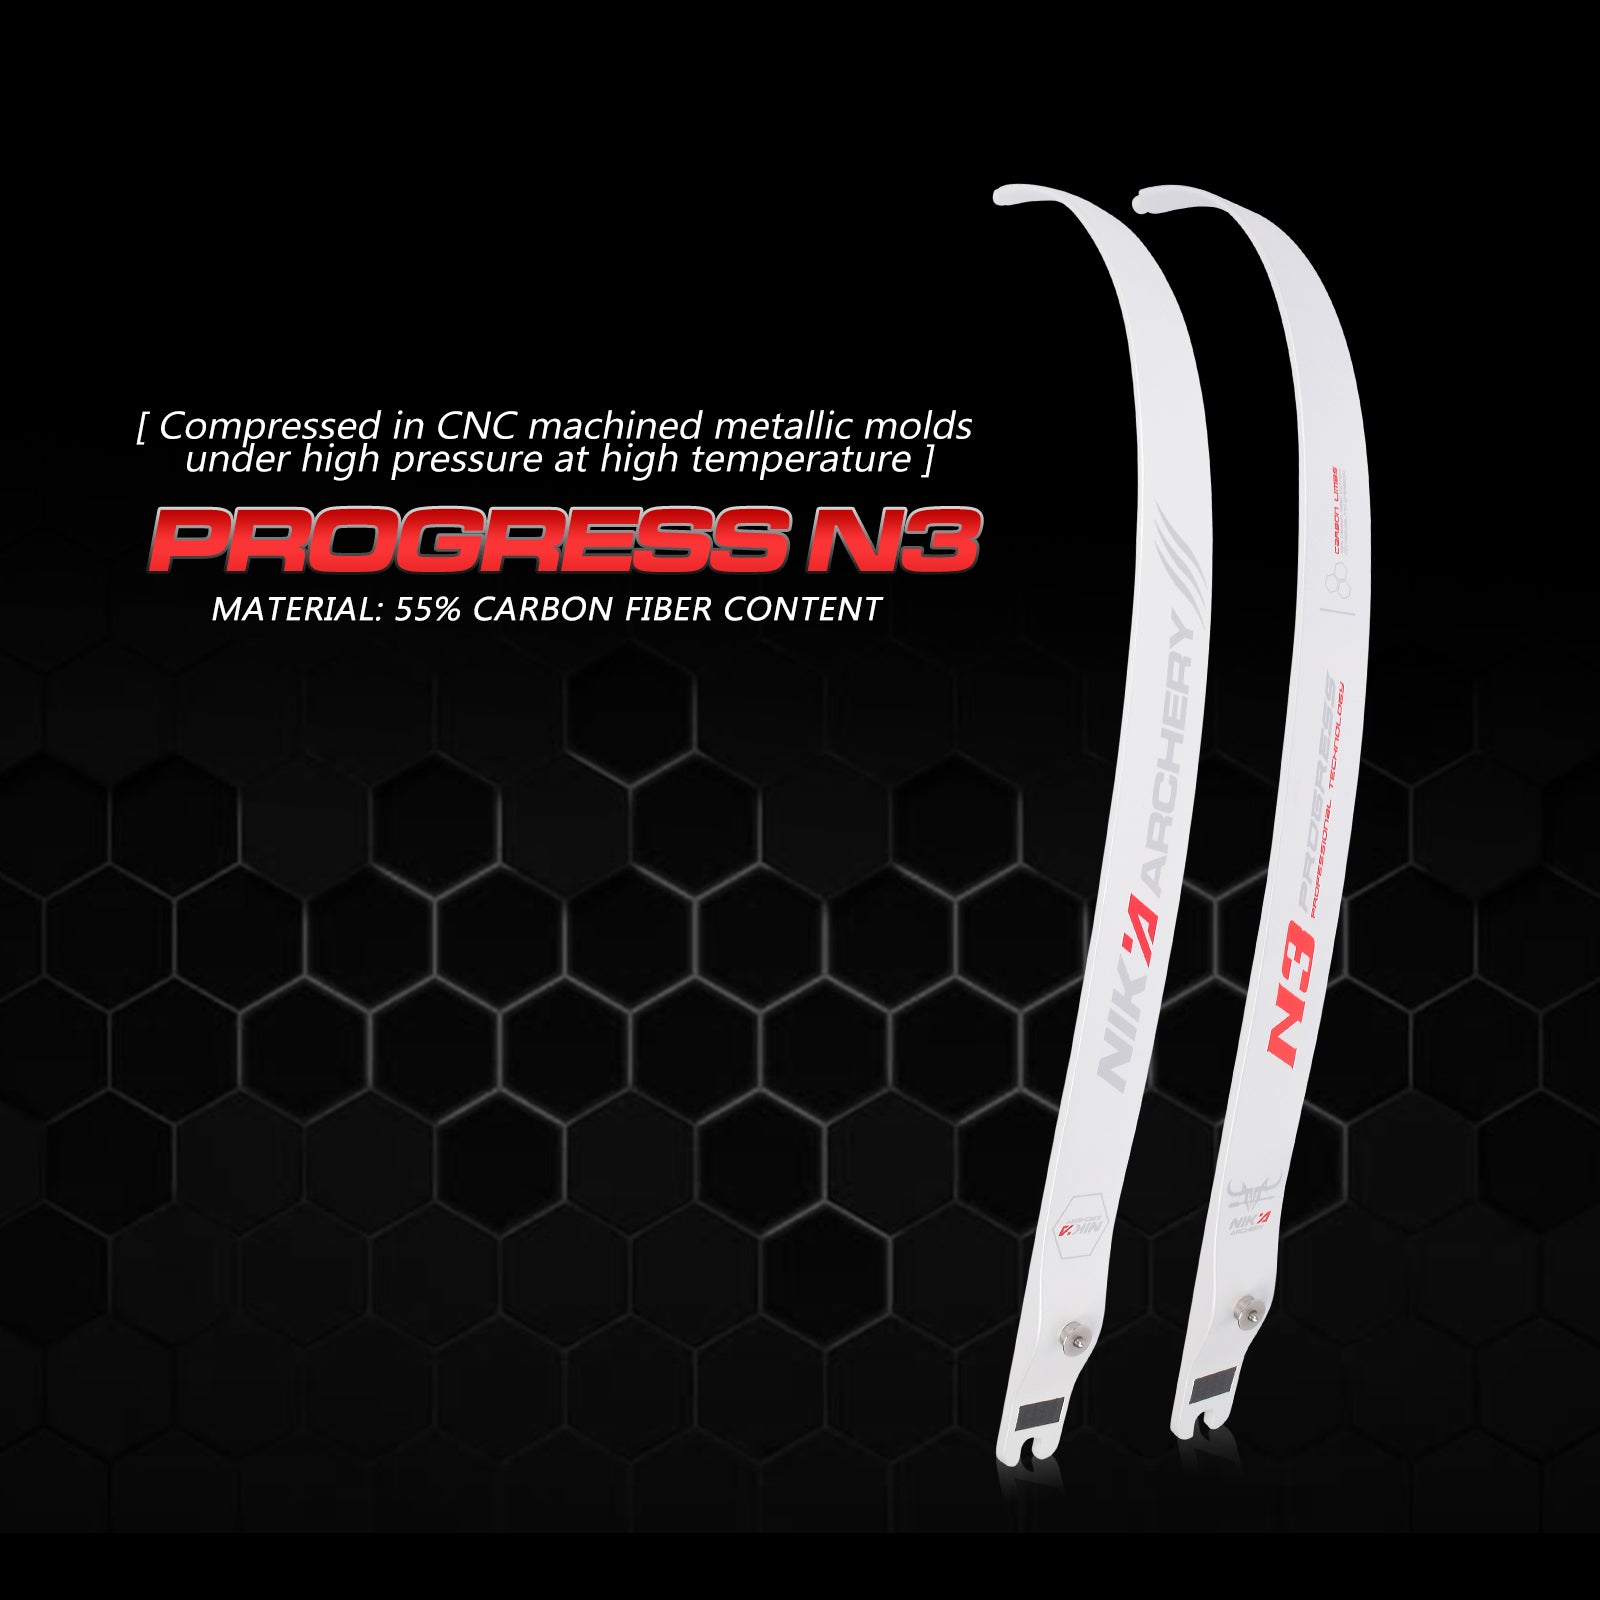 Newest 68'' 70'' @25H 55% Carbon Fiber Content N3 Limbs Progress Series 16-50LBS with Quick-drying Sportswear